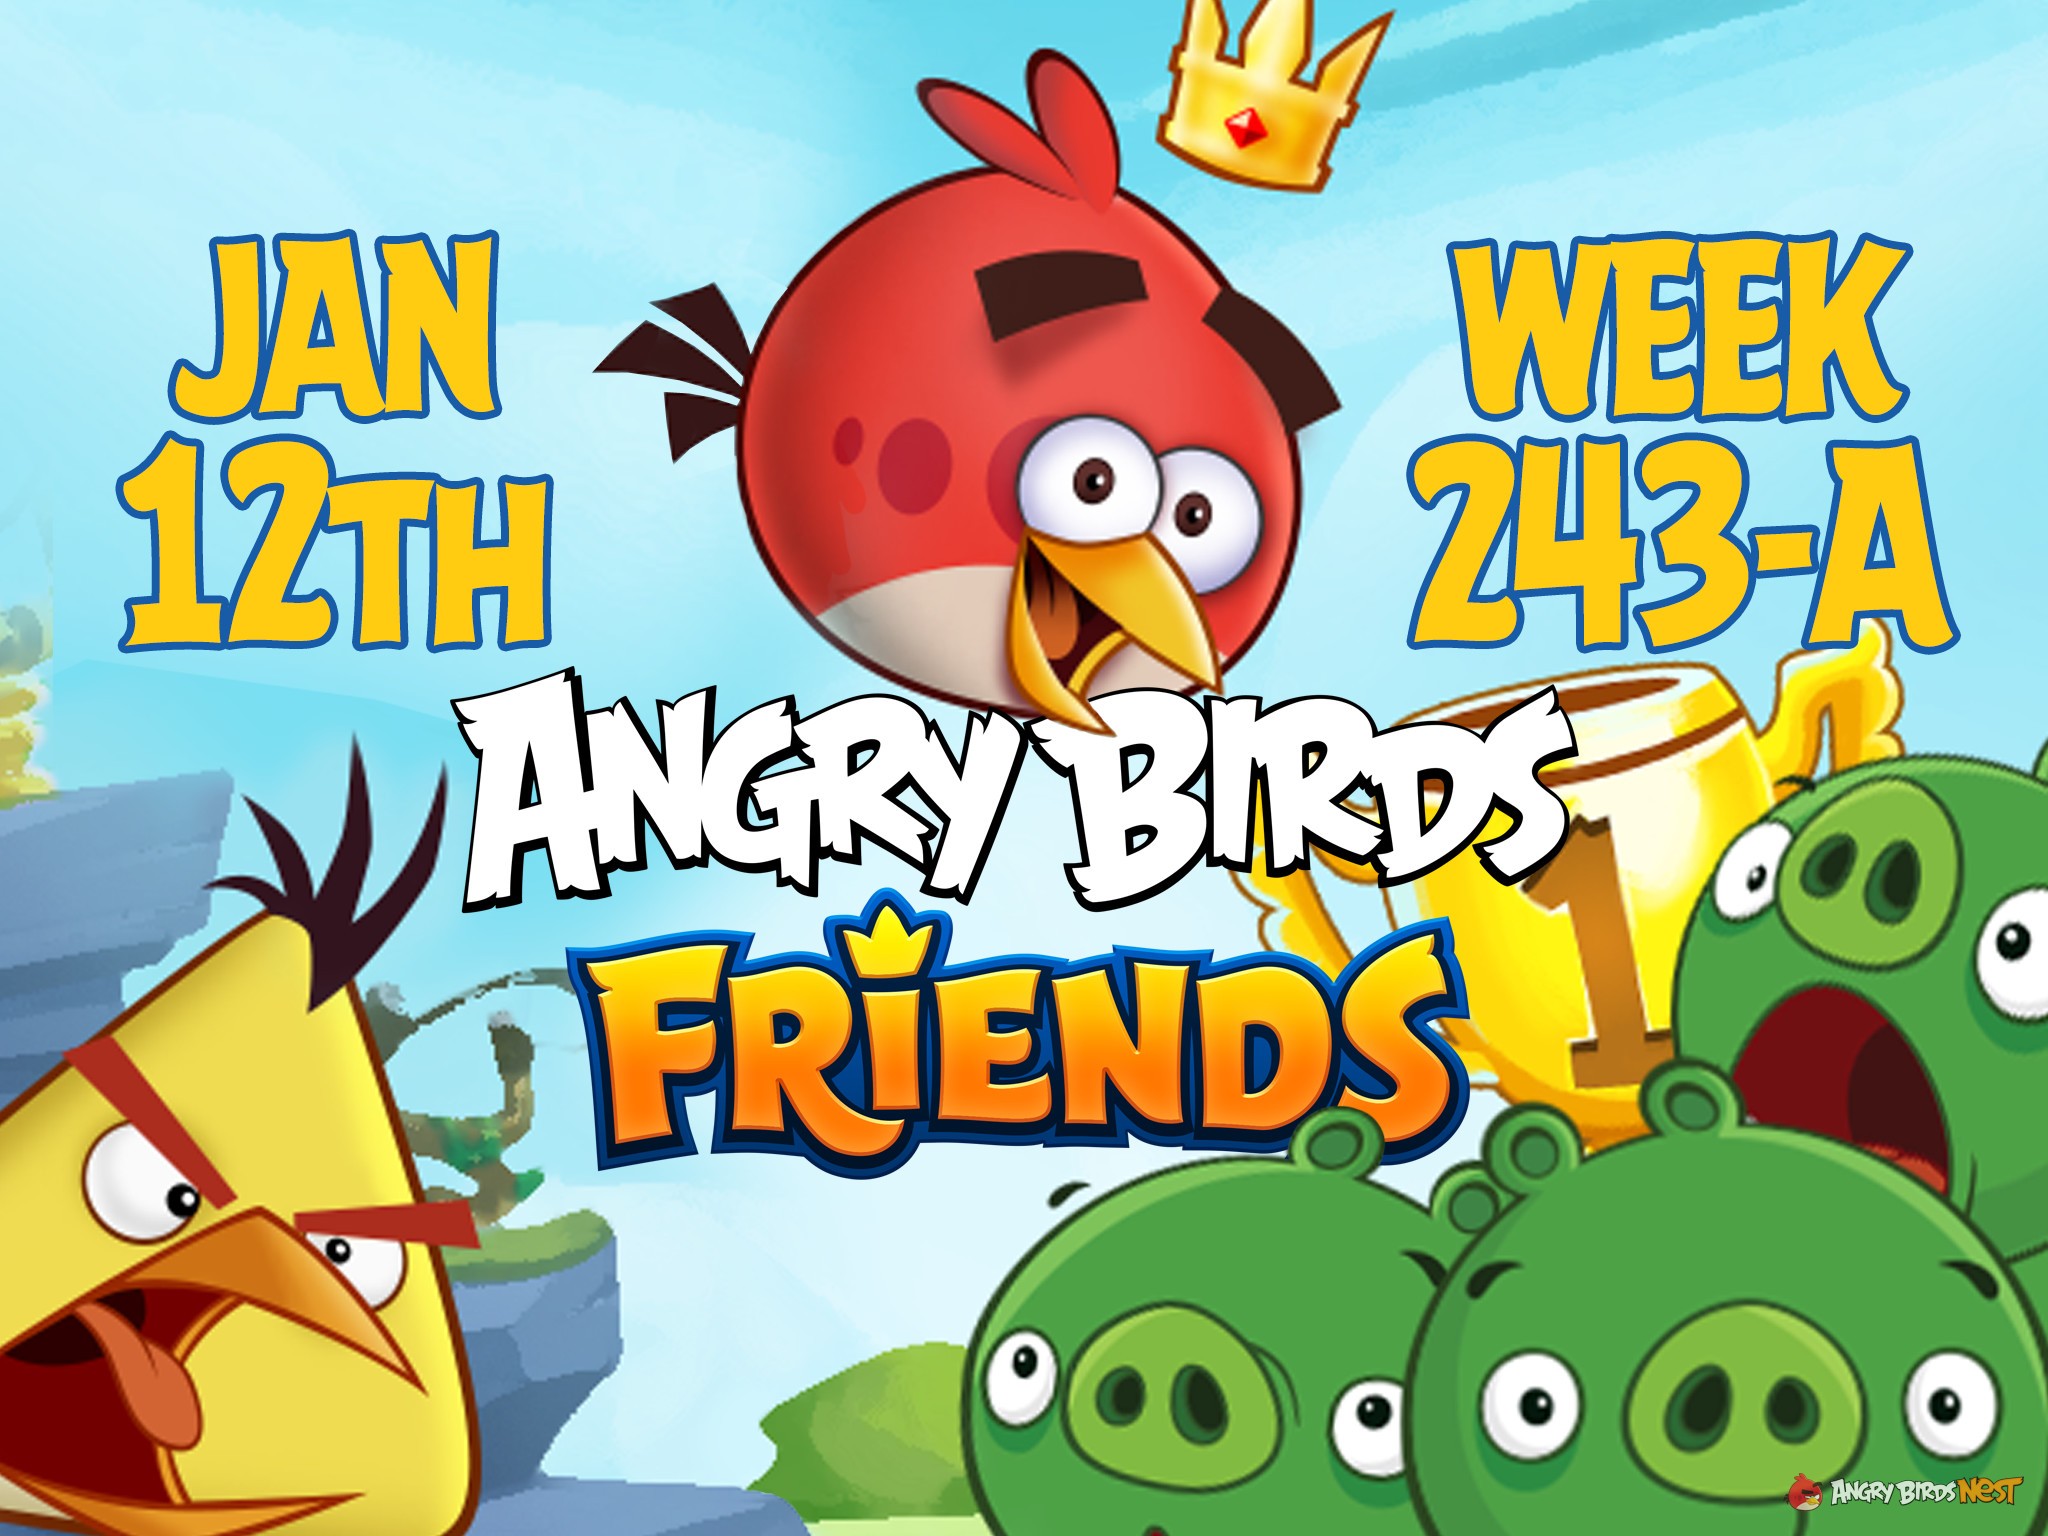 Angry Birds Friends Tournament Week 243-A Feature Image